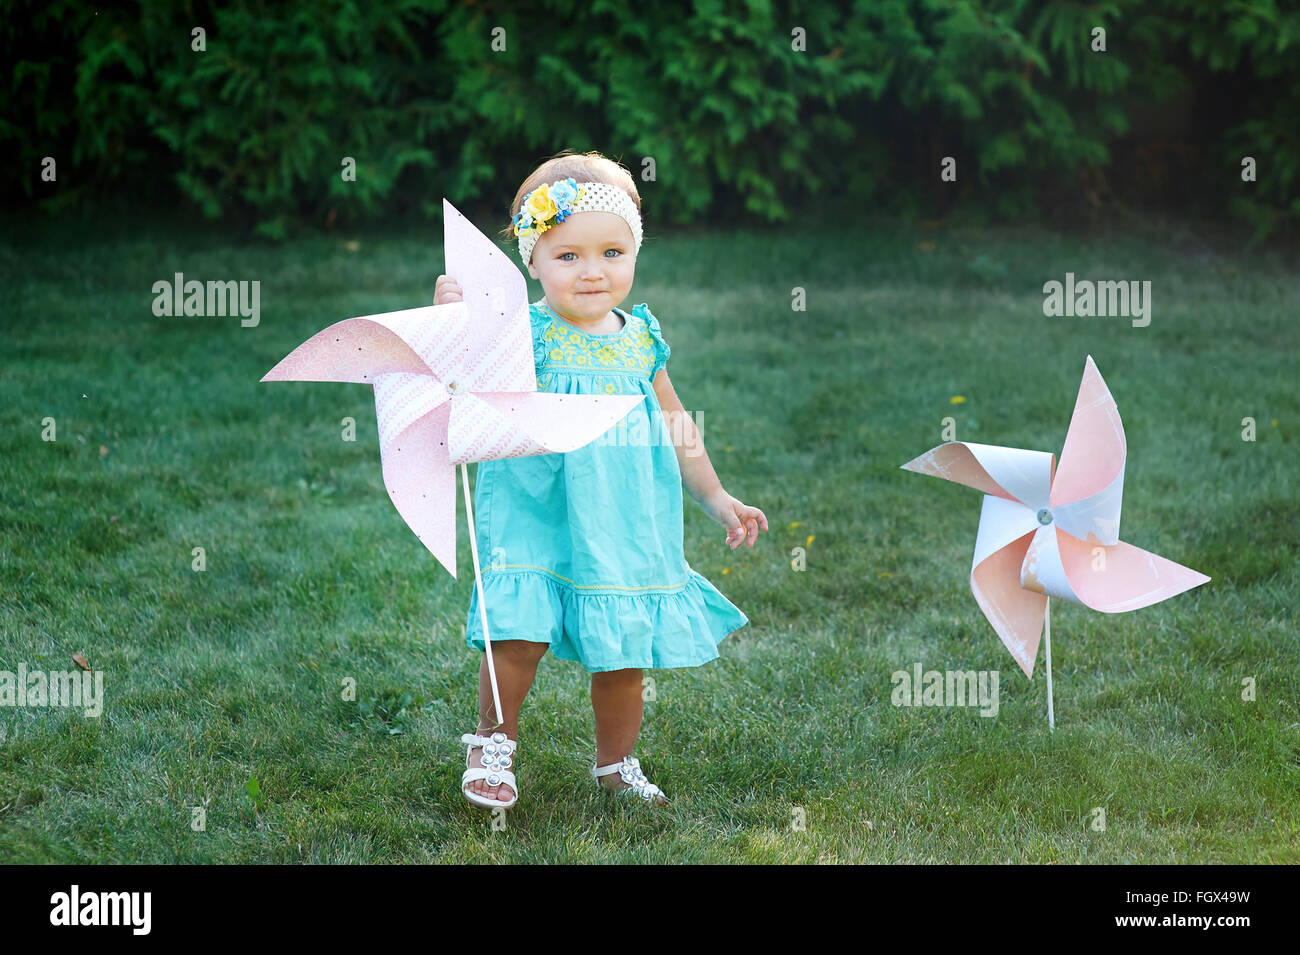 happy smiling little girl standing on meadow and holding toy white pinwheel windmill Stock Photo